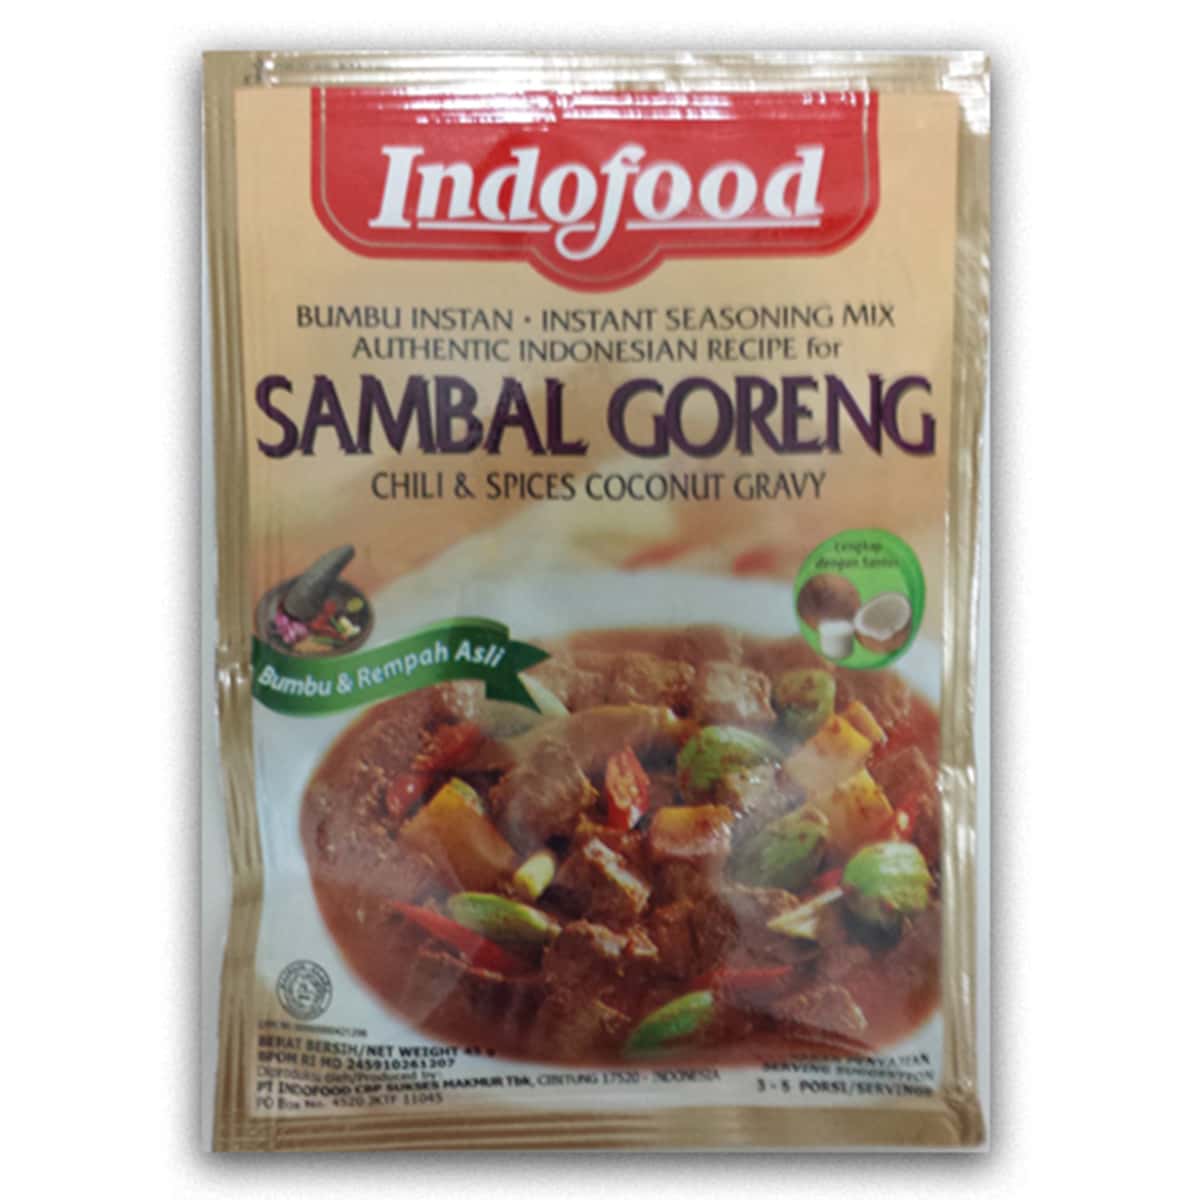 Buy Indofood Sambal Goreng (Chili and Spices Coconut Gravy) - 45 gm